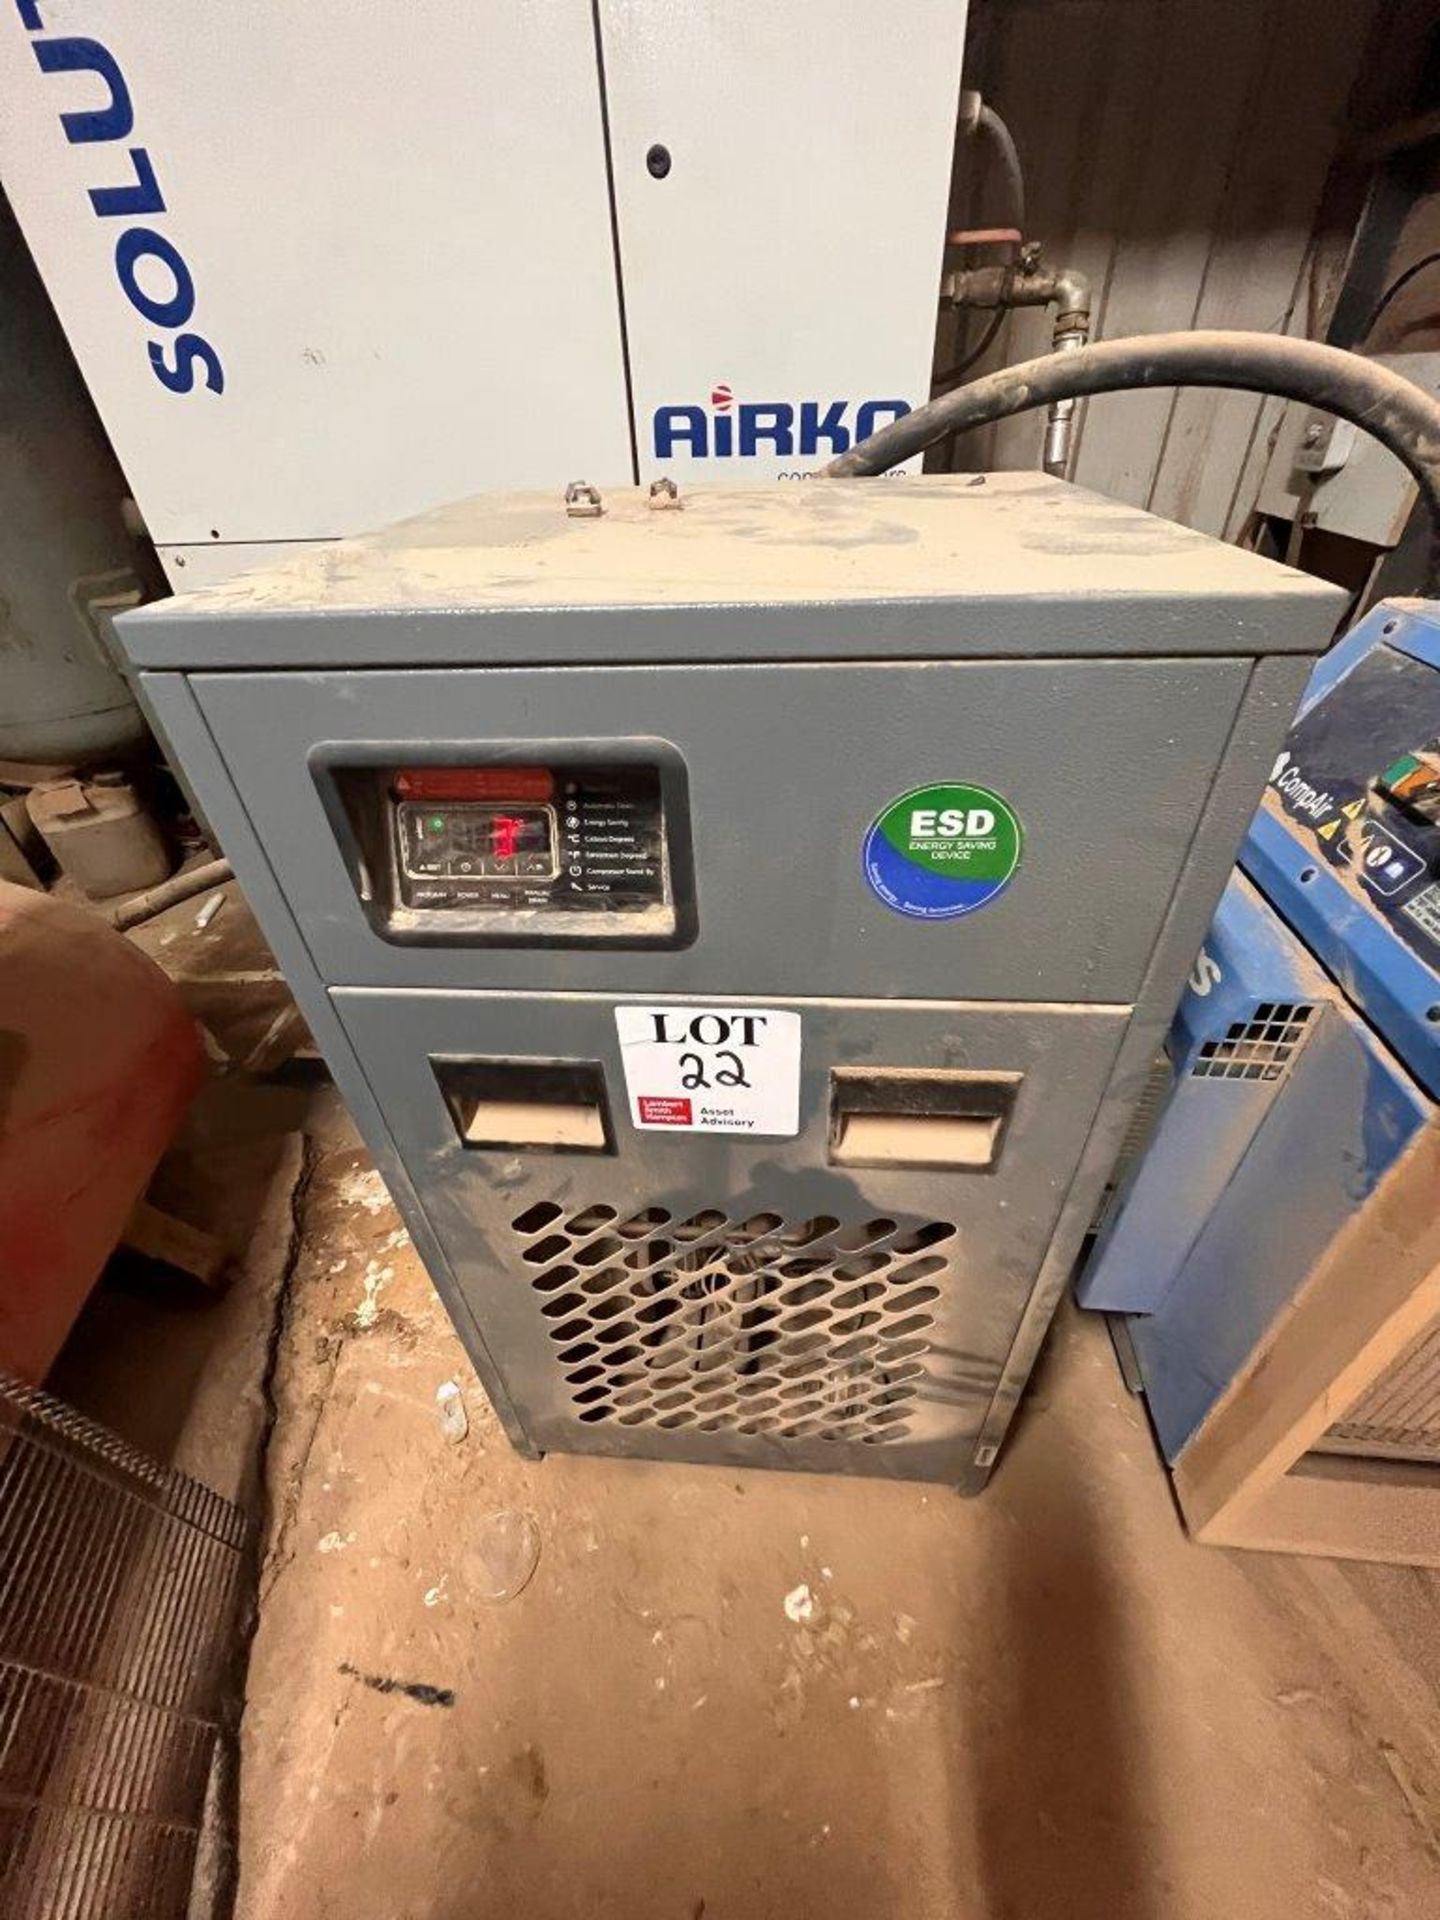 ESD MKE 190 refrigerant compressed air dryer, serial no: 1119MA07930, with Rednal 340 litre welded